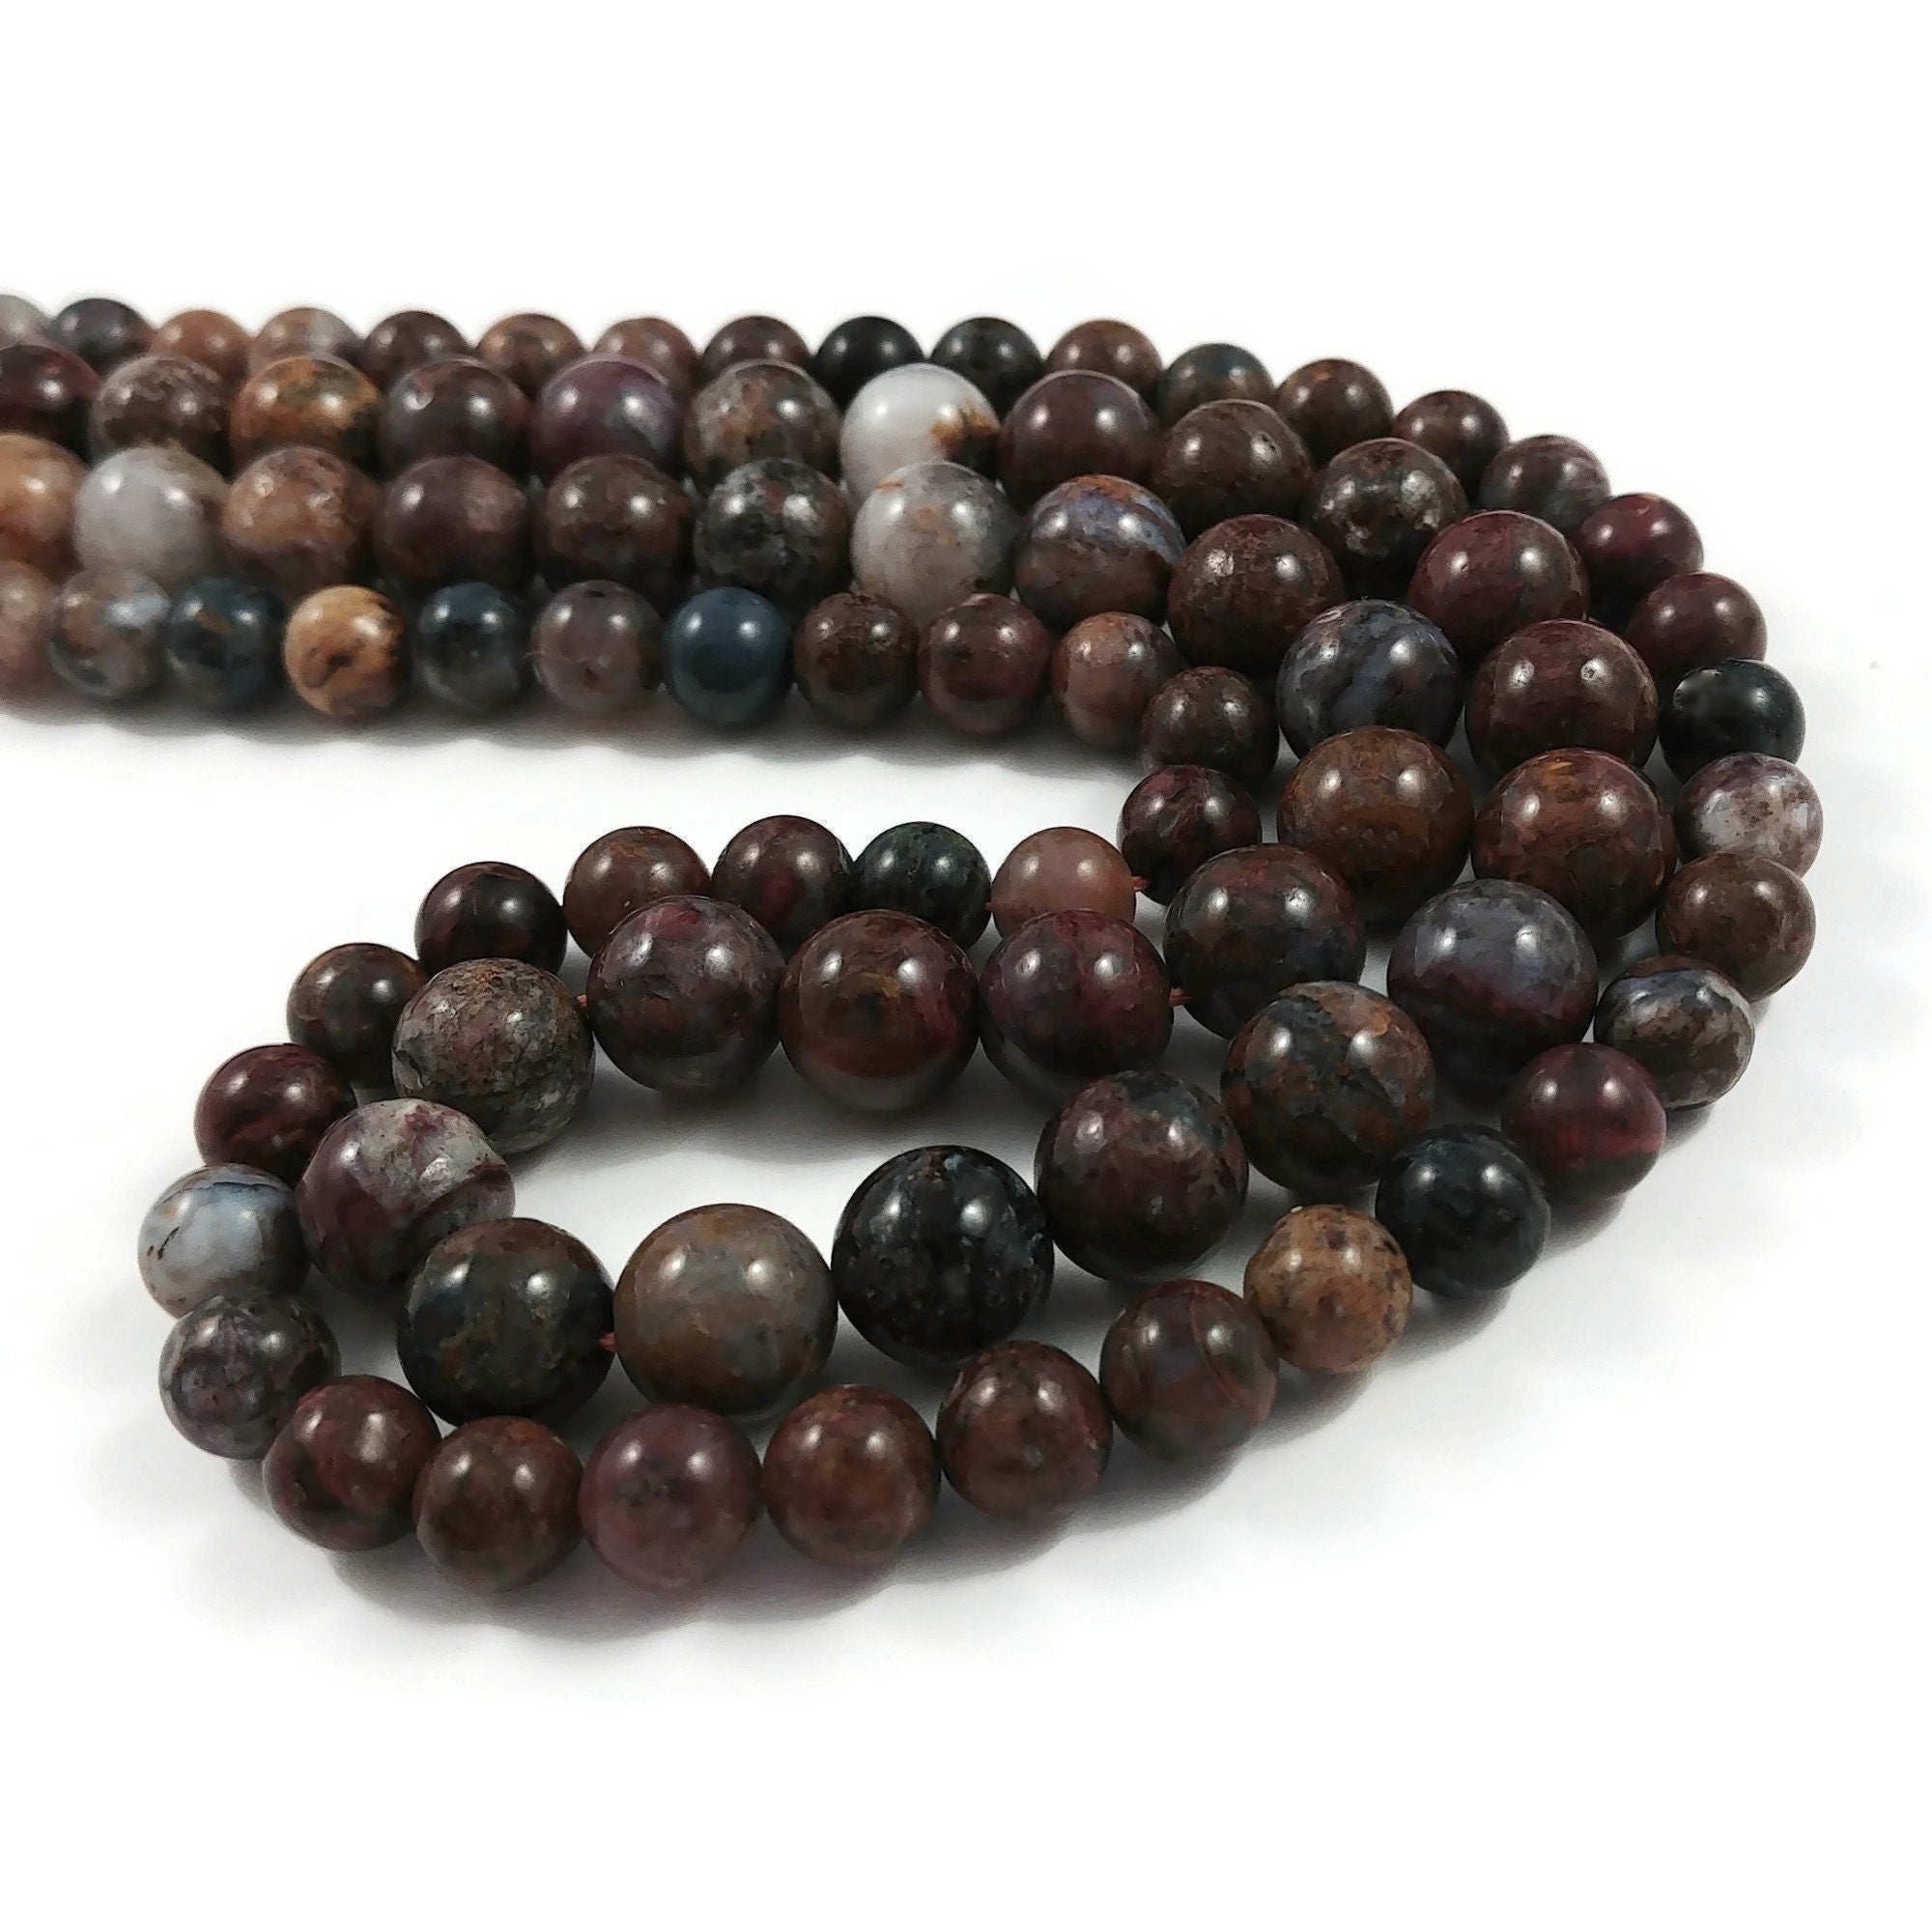 Natural pietersite beads, Strands 6mm or 8mm, Round meditation stone beads, Gemstone beads for jewelry making